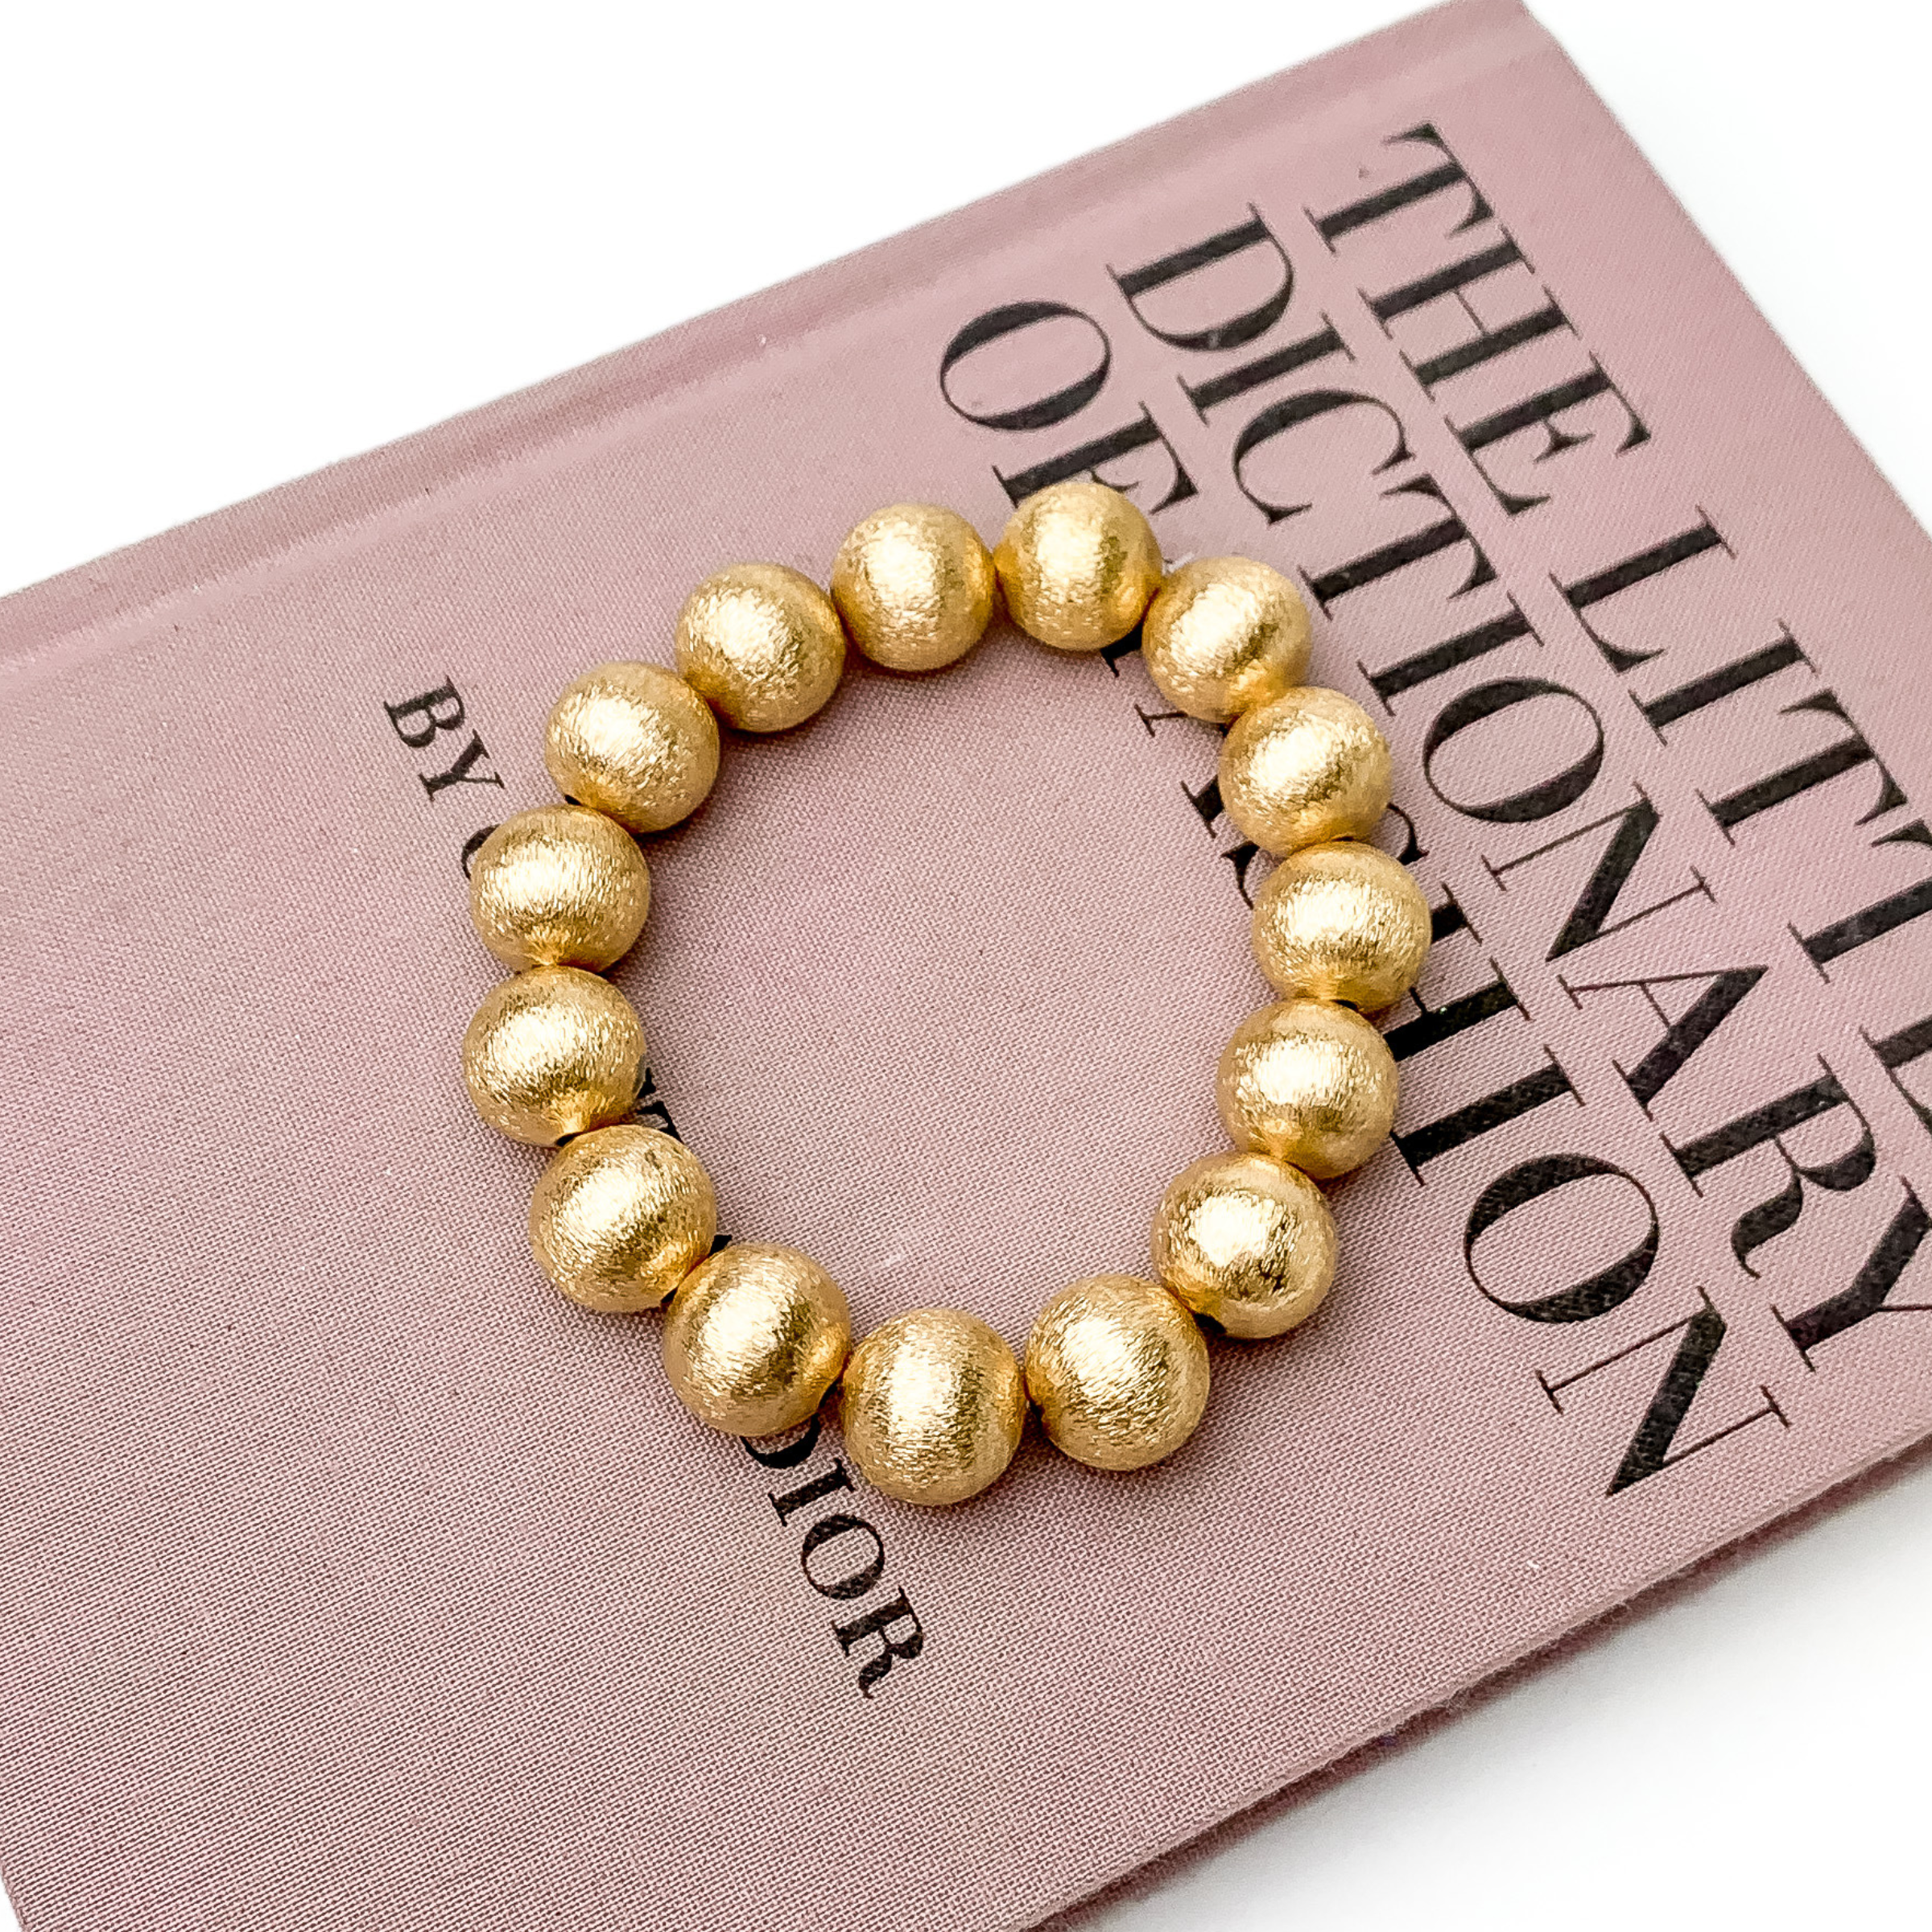 Gold beaded bracelet pictured laying on a mauve book on a white background.  